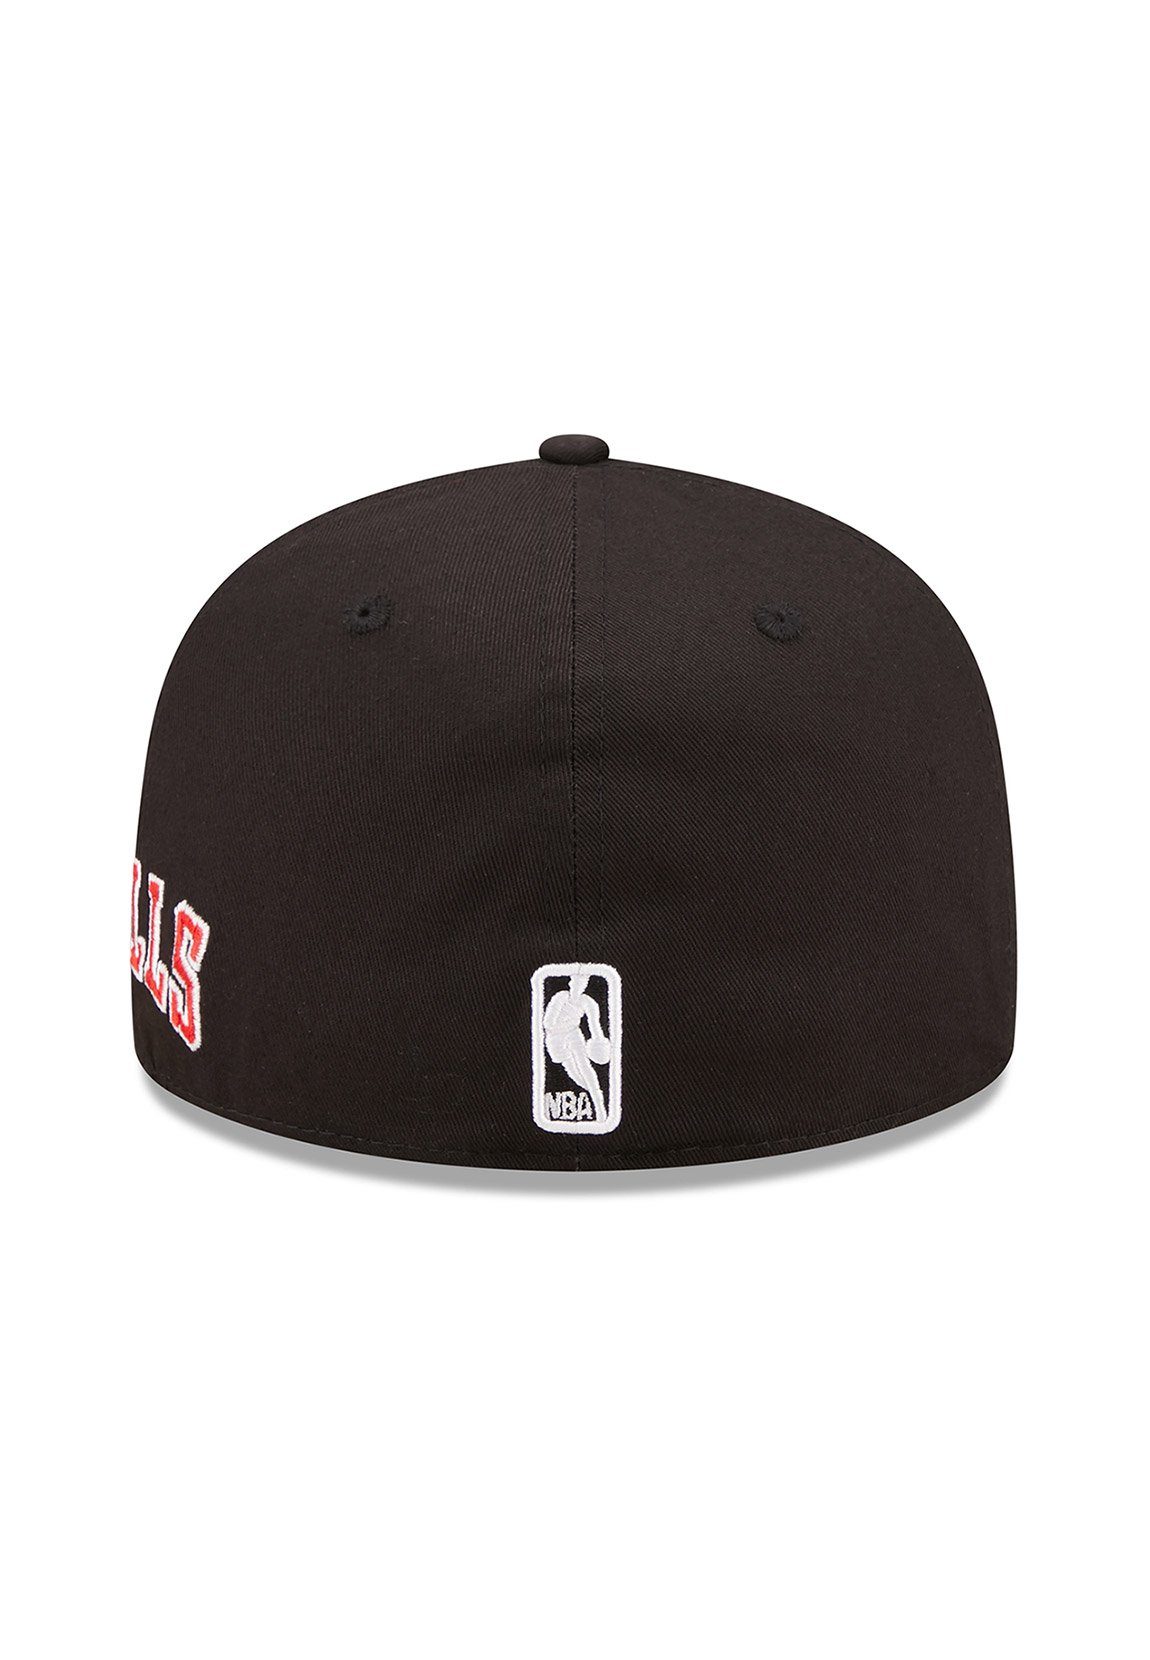 New Era Fitted Cap New 59Fifty Team Schwarz CHICAGO City Rot BULLS Cap Patch